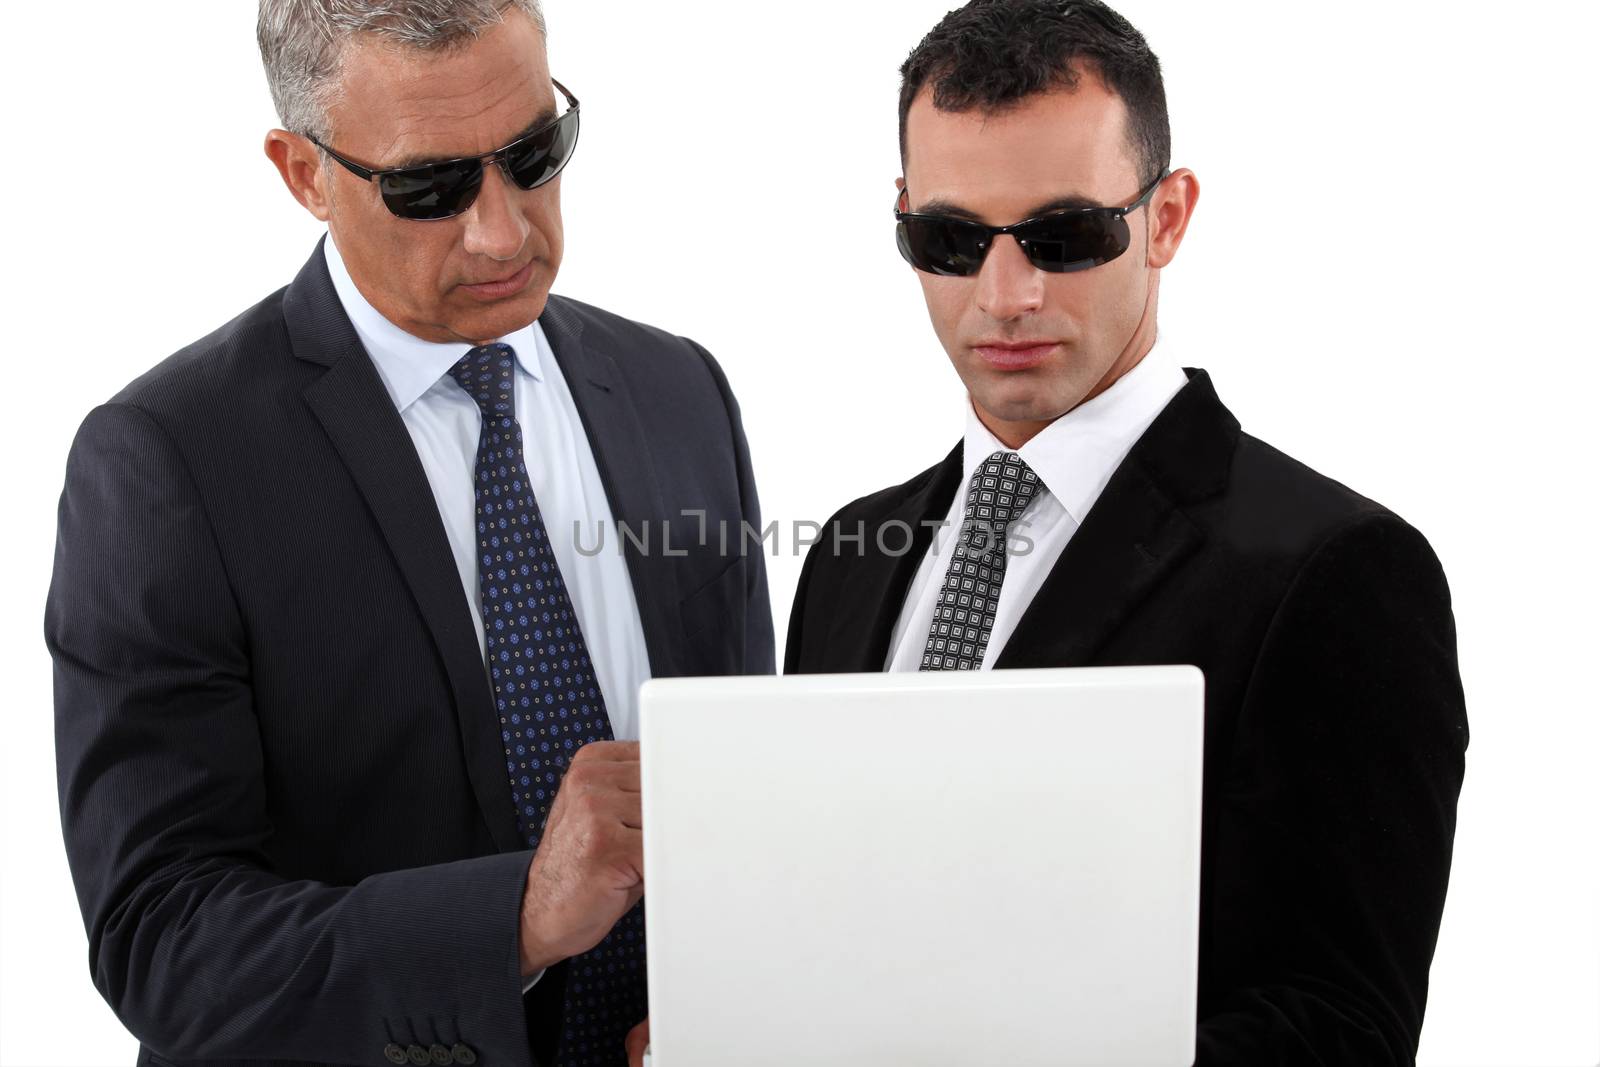 Serious men in smart suits with sunglasses holding a laptop by phovoir